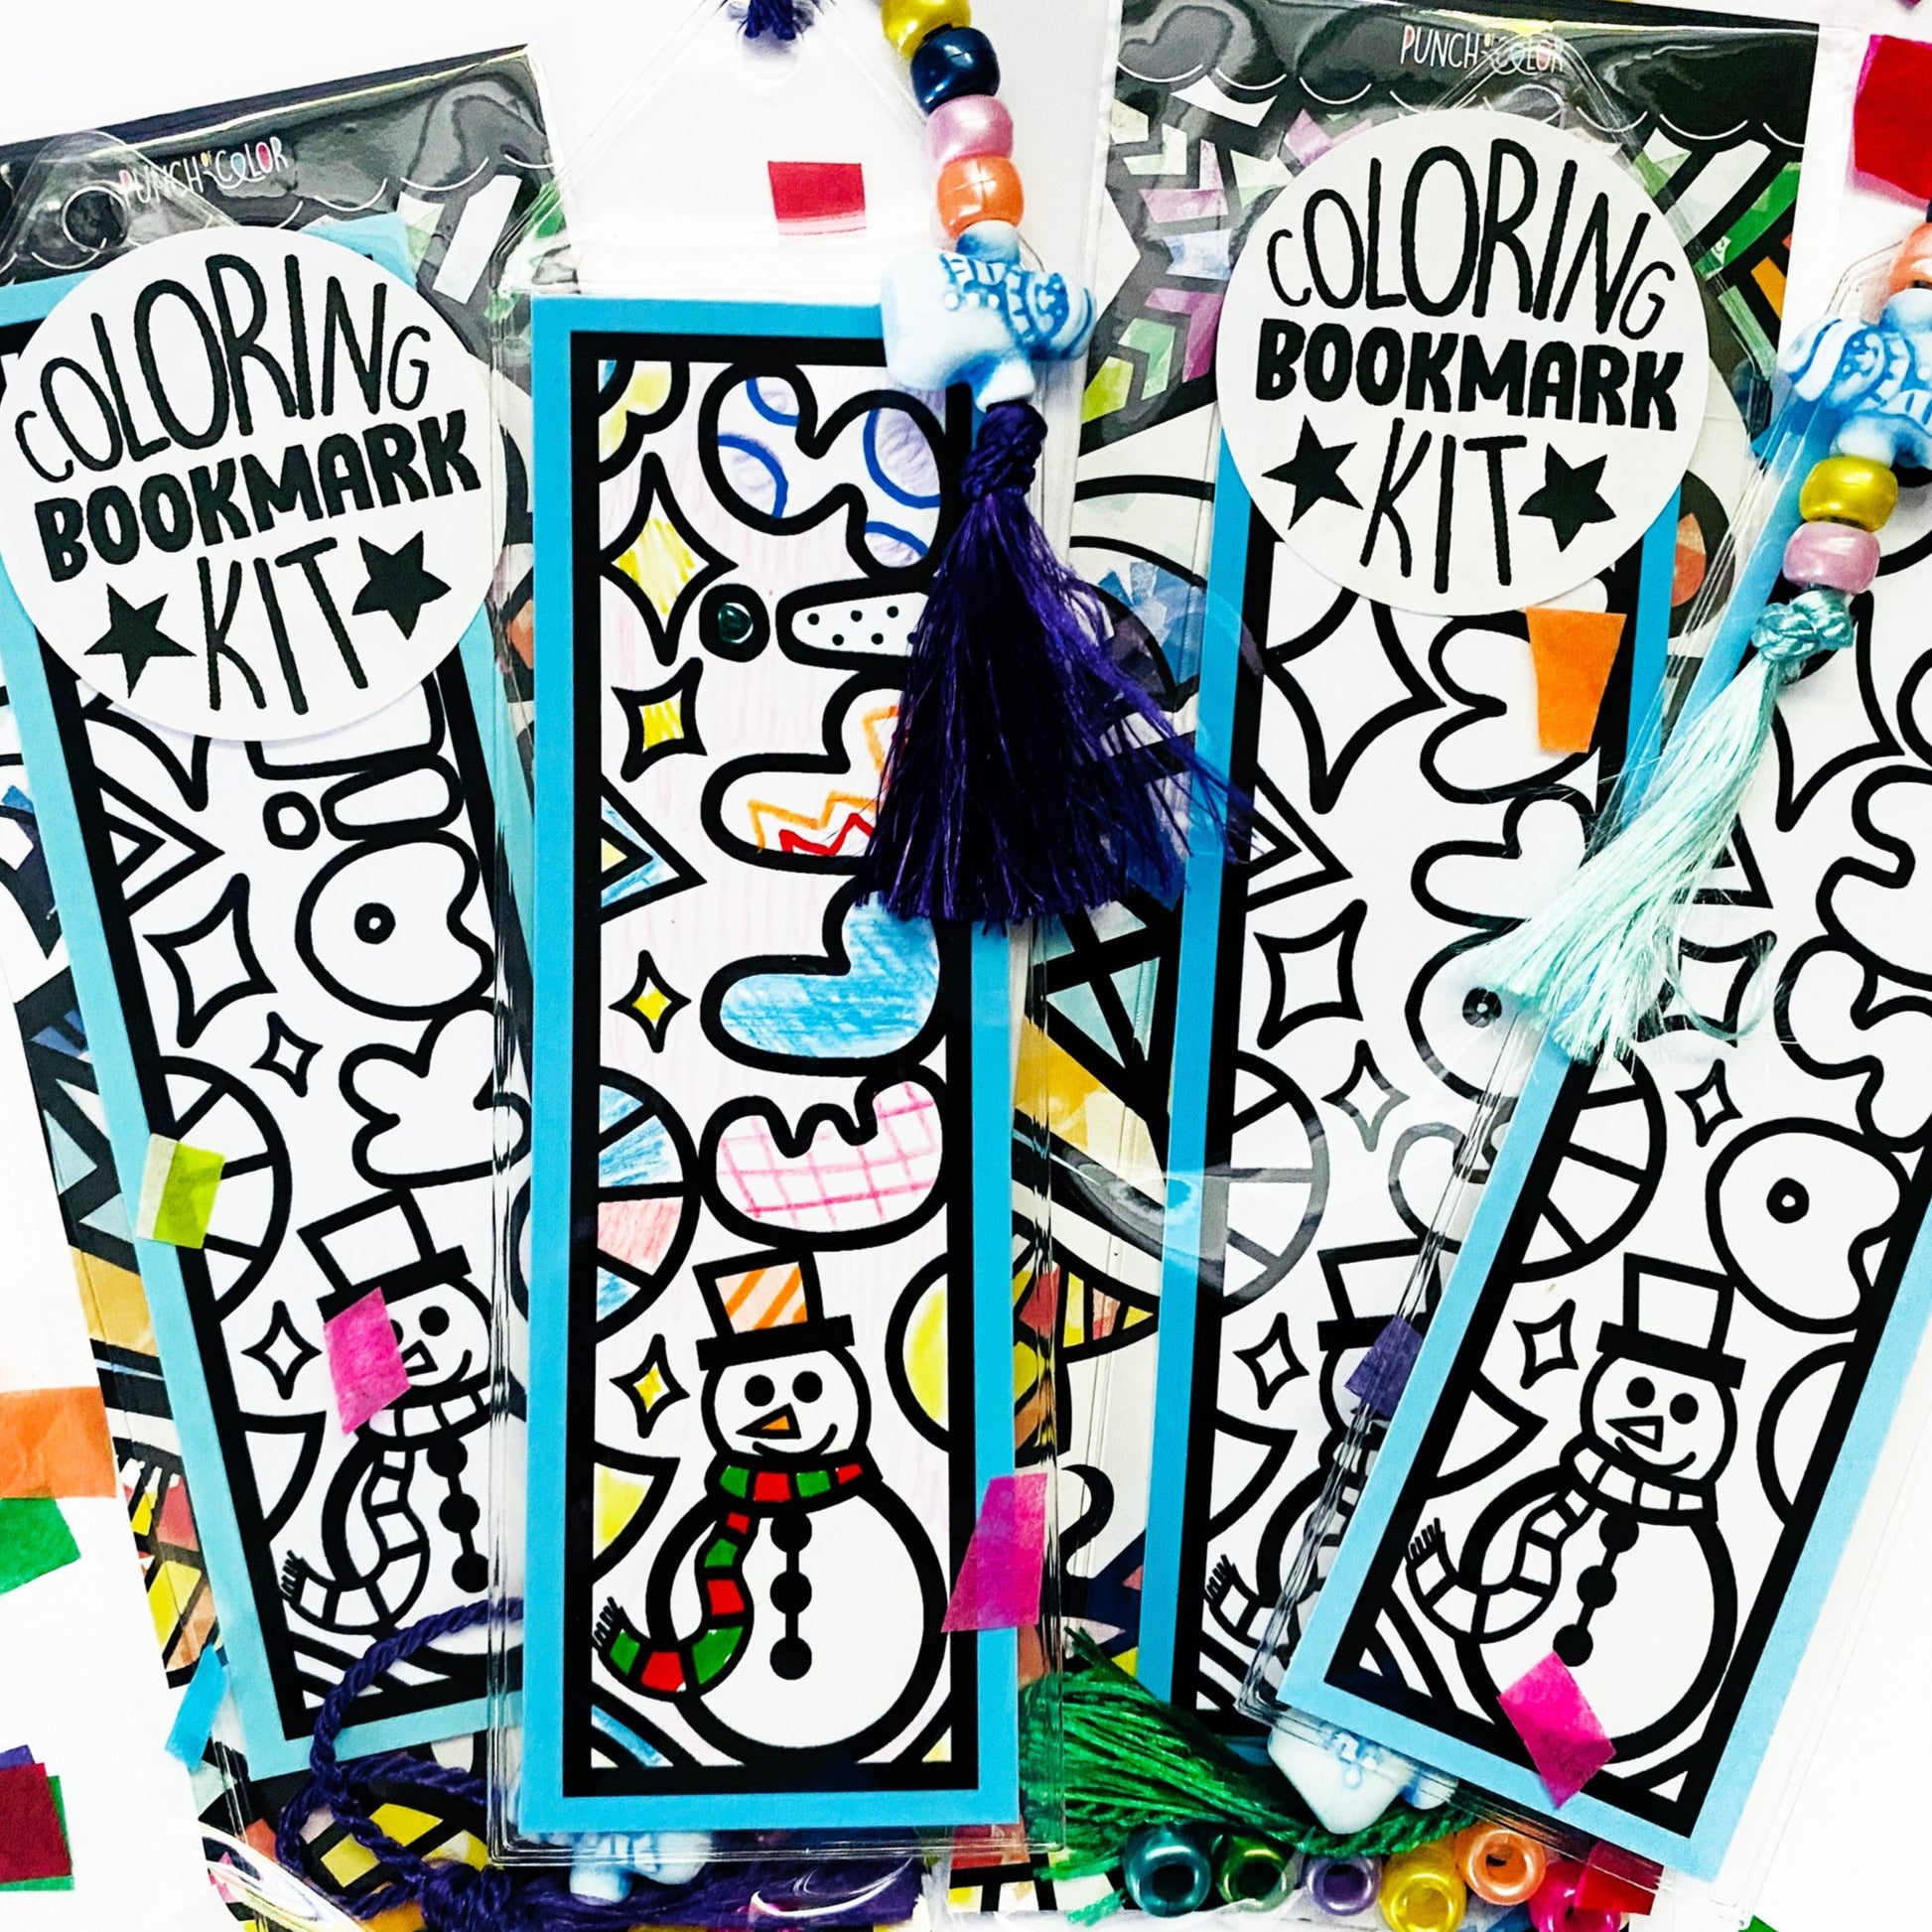 Snowman coloring bookmark gift for children. Kids bookmark stocking stuffer or snowman party favor.